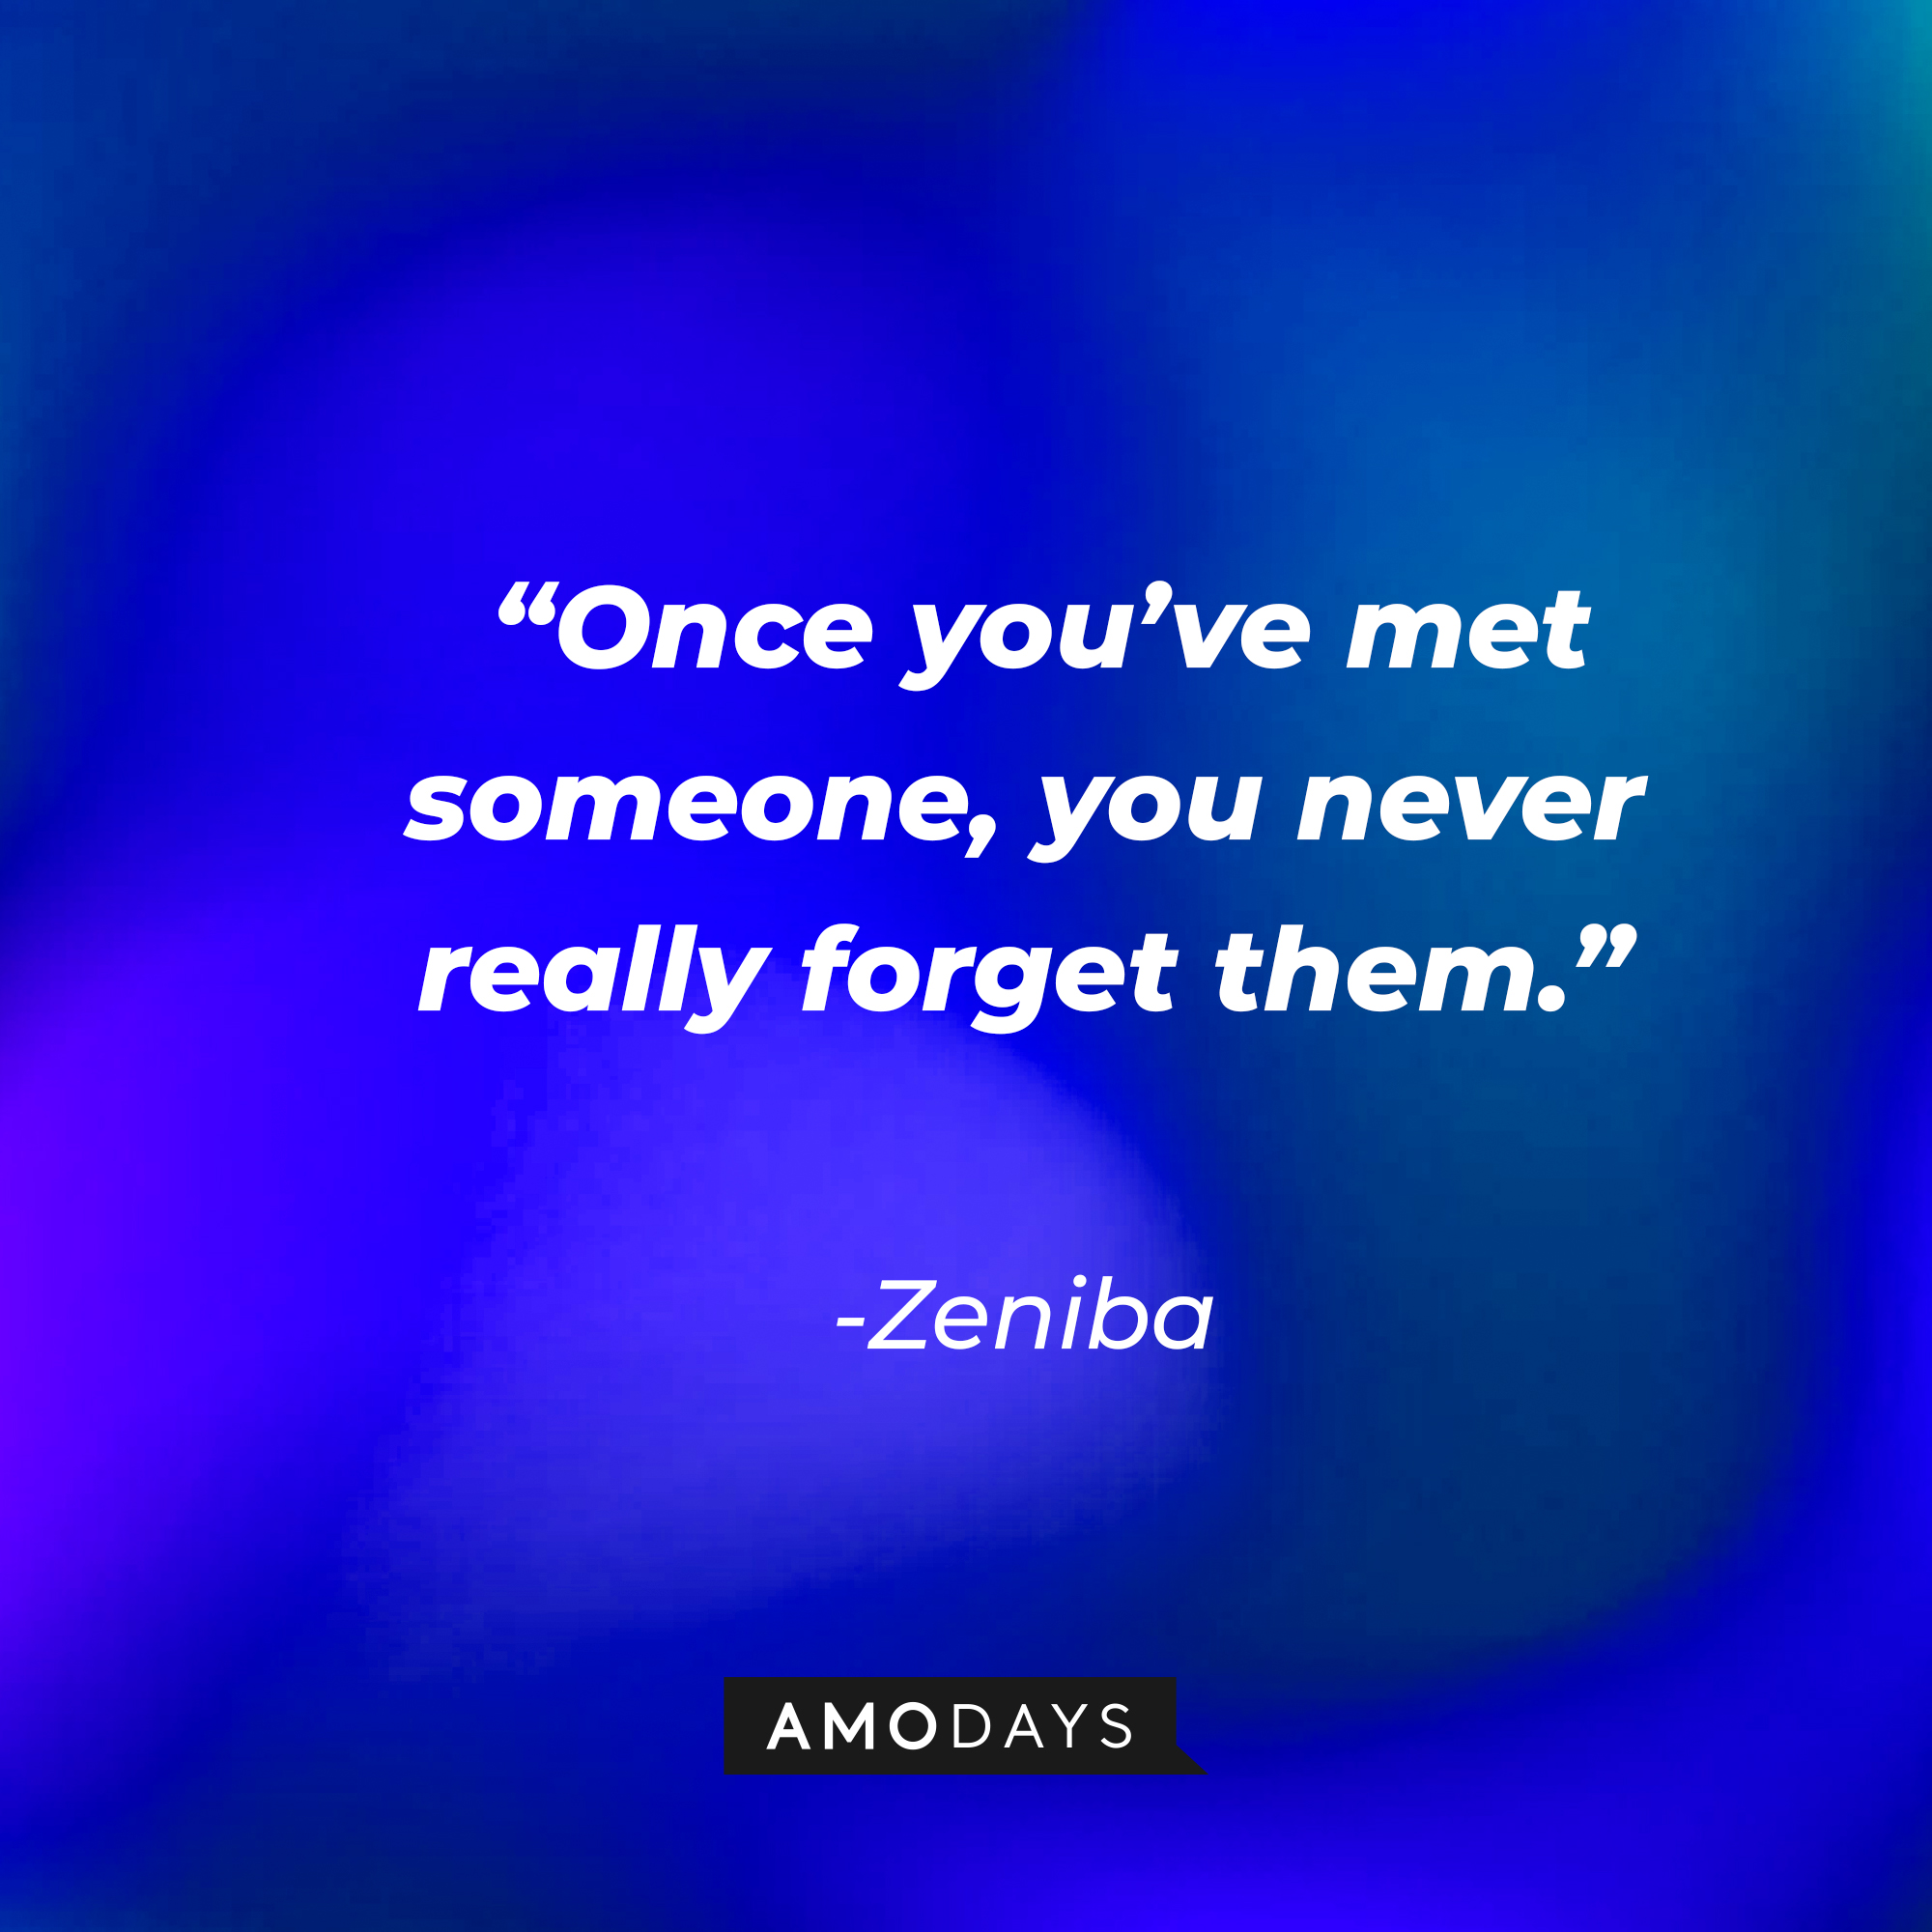 Zeniba’s quote: “Once you’ve met someone, you never really forget them.” | Source: AmoDays